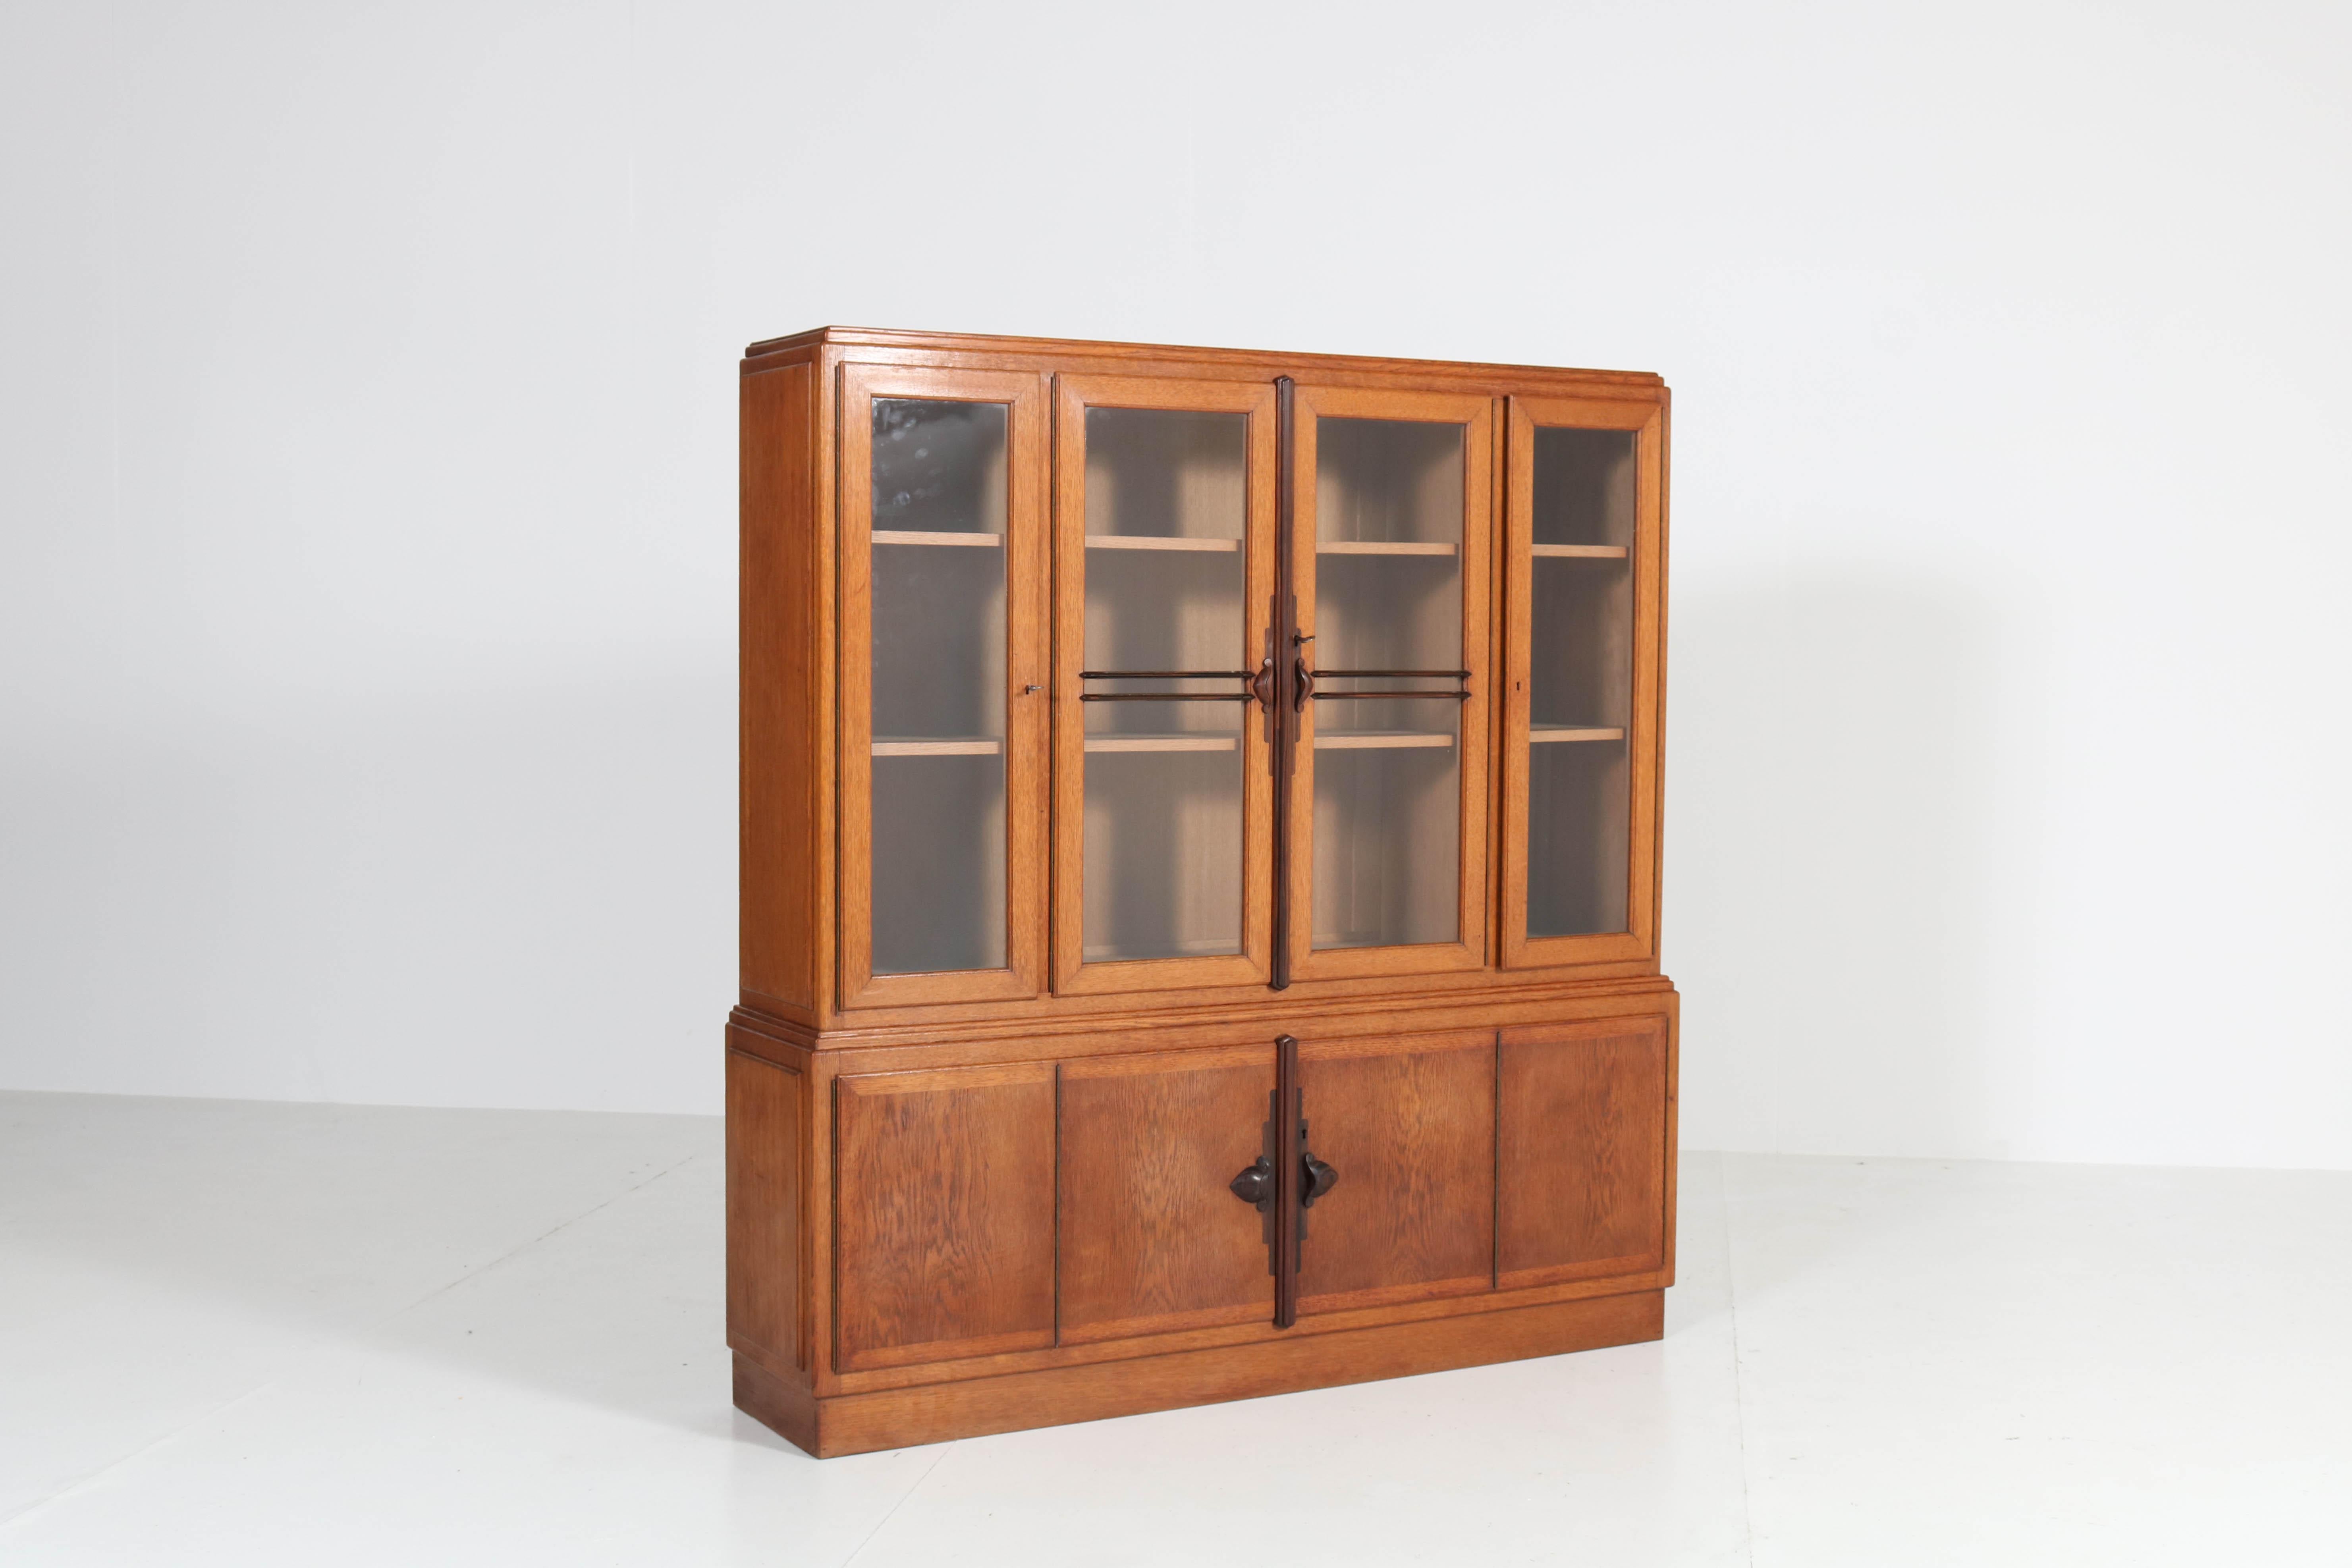 Wonderful and rare Art Deco Amsterdam School bookcase.
Striking Dutch design from the 1920s.
Solid oak and oak veneer with solid ebony Macassar handles and lining.
Six original solid oak shelves.
In very good condition with minor wear consistent